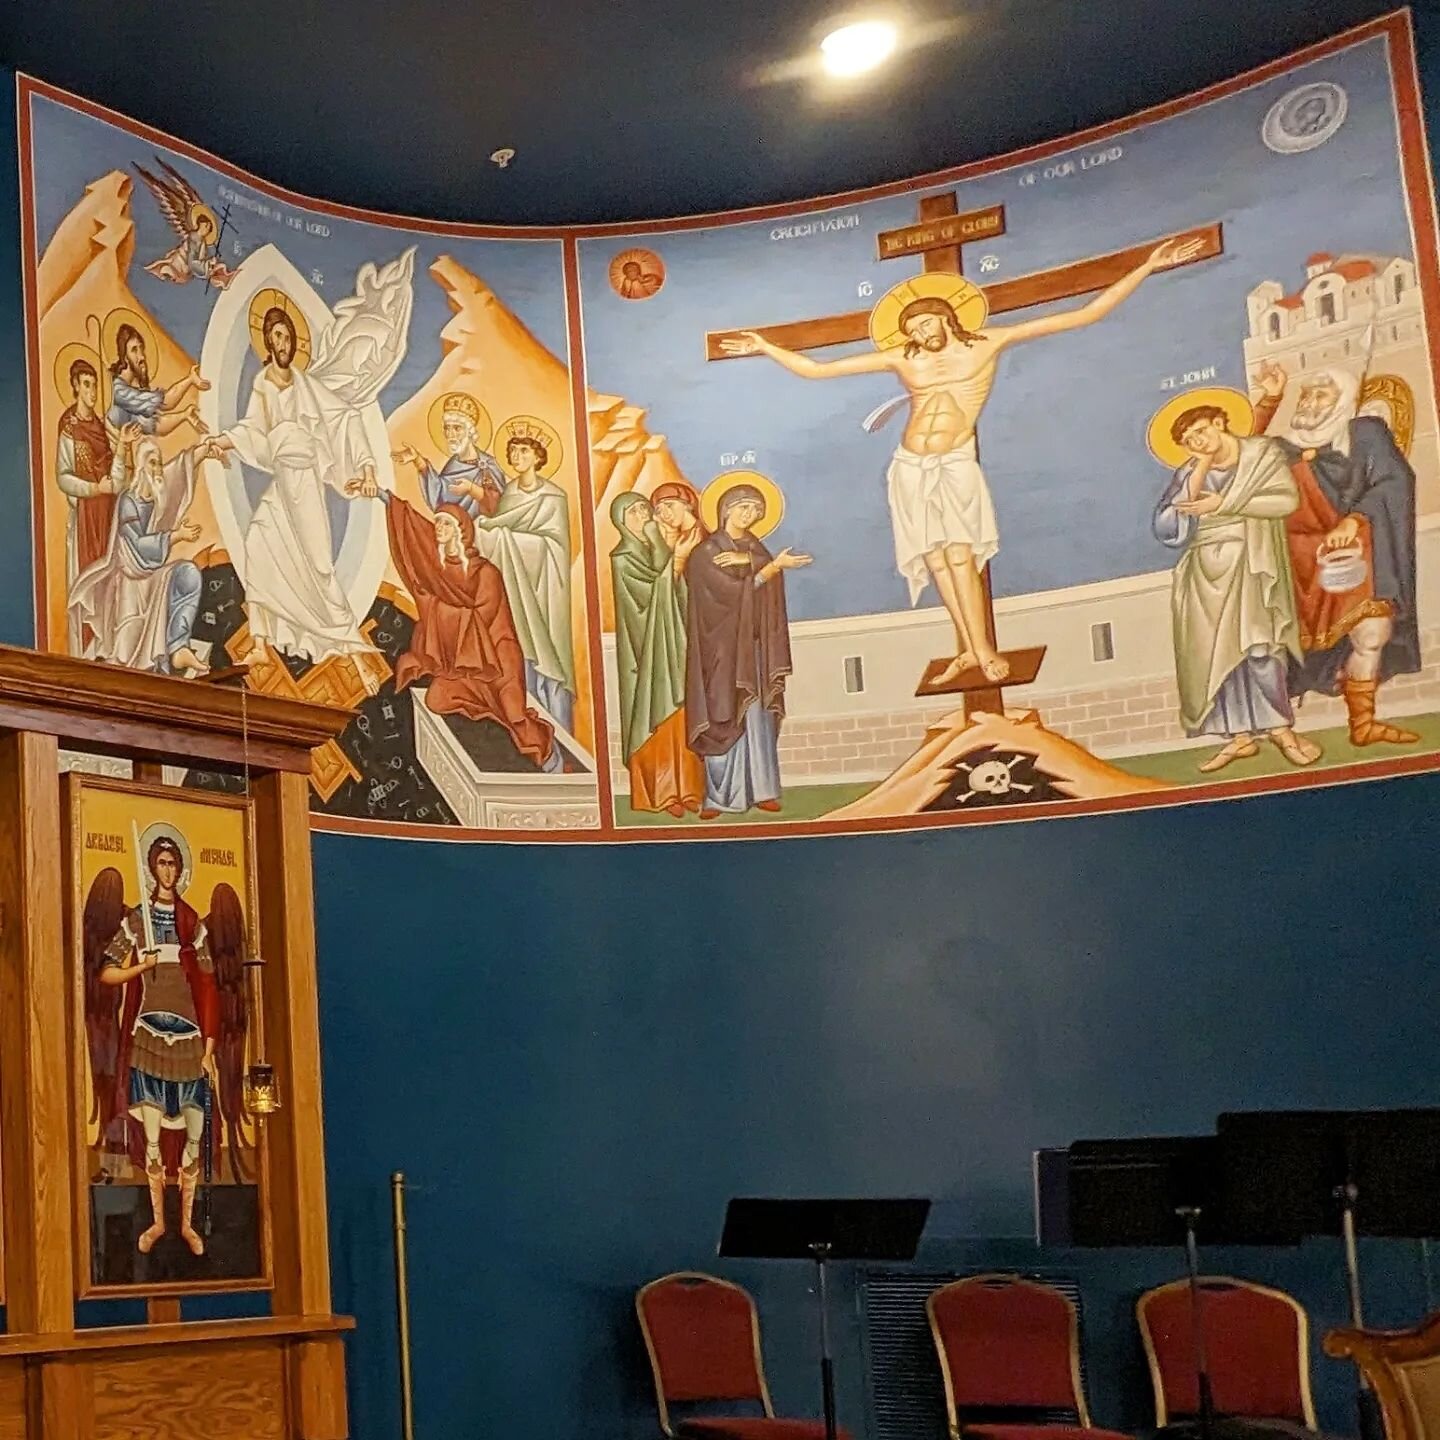 Earlier this week, I installed murals of our Lord's Crucifixion and Resurrection at St. Nicholas Antiochian Orthodox Church in Urbana, Illinois, in anticipation of Orthodox Holy Week and Pascha coming up in just a few weeks.
.
.
.

Prints available f